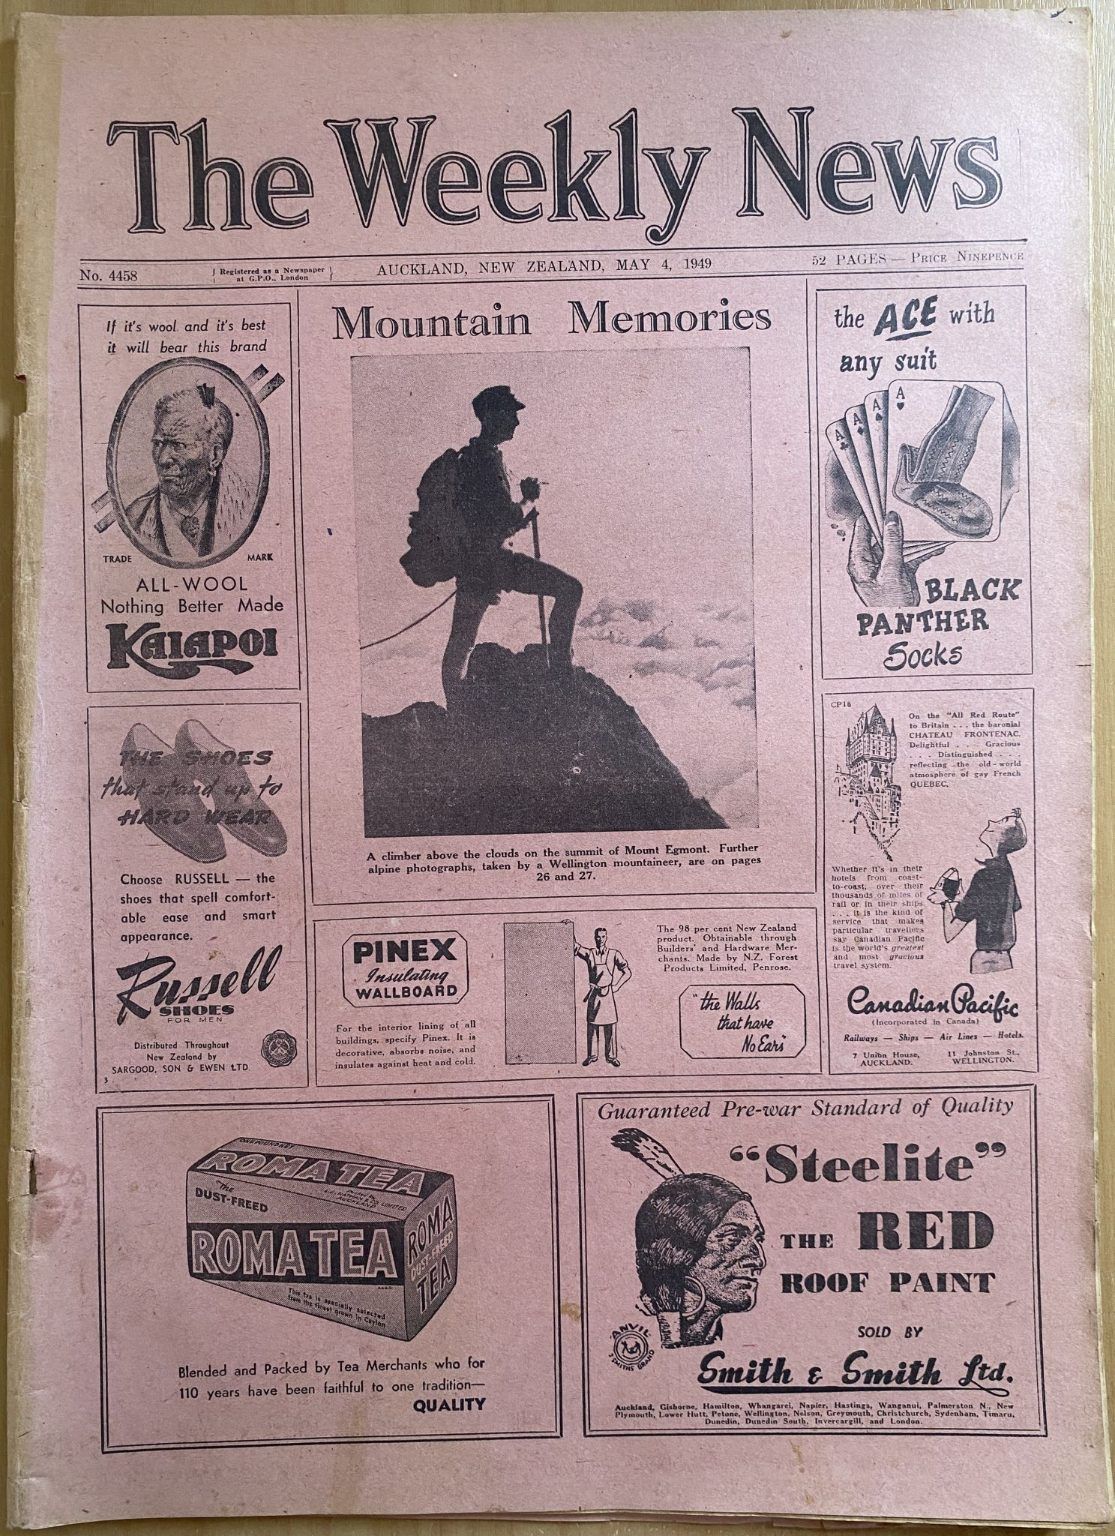 OLD NEWSPAPER: The Weekly News, No. 4458, 4 May 1949